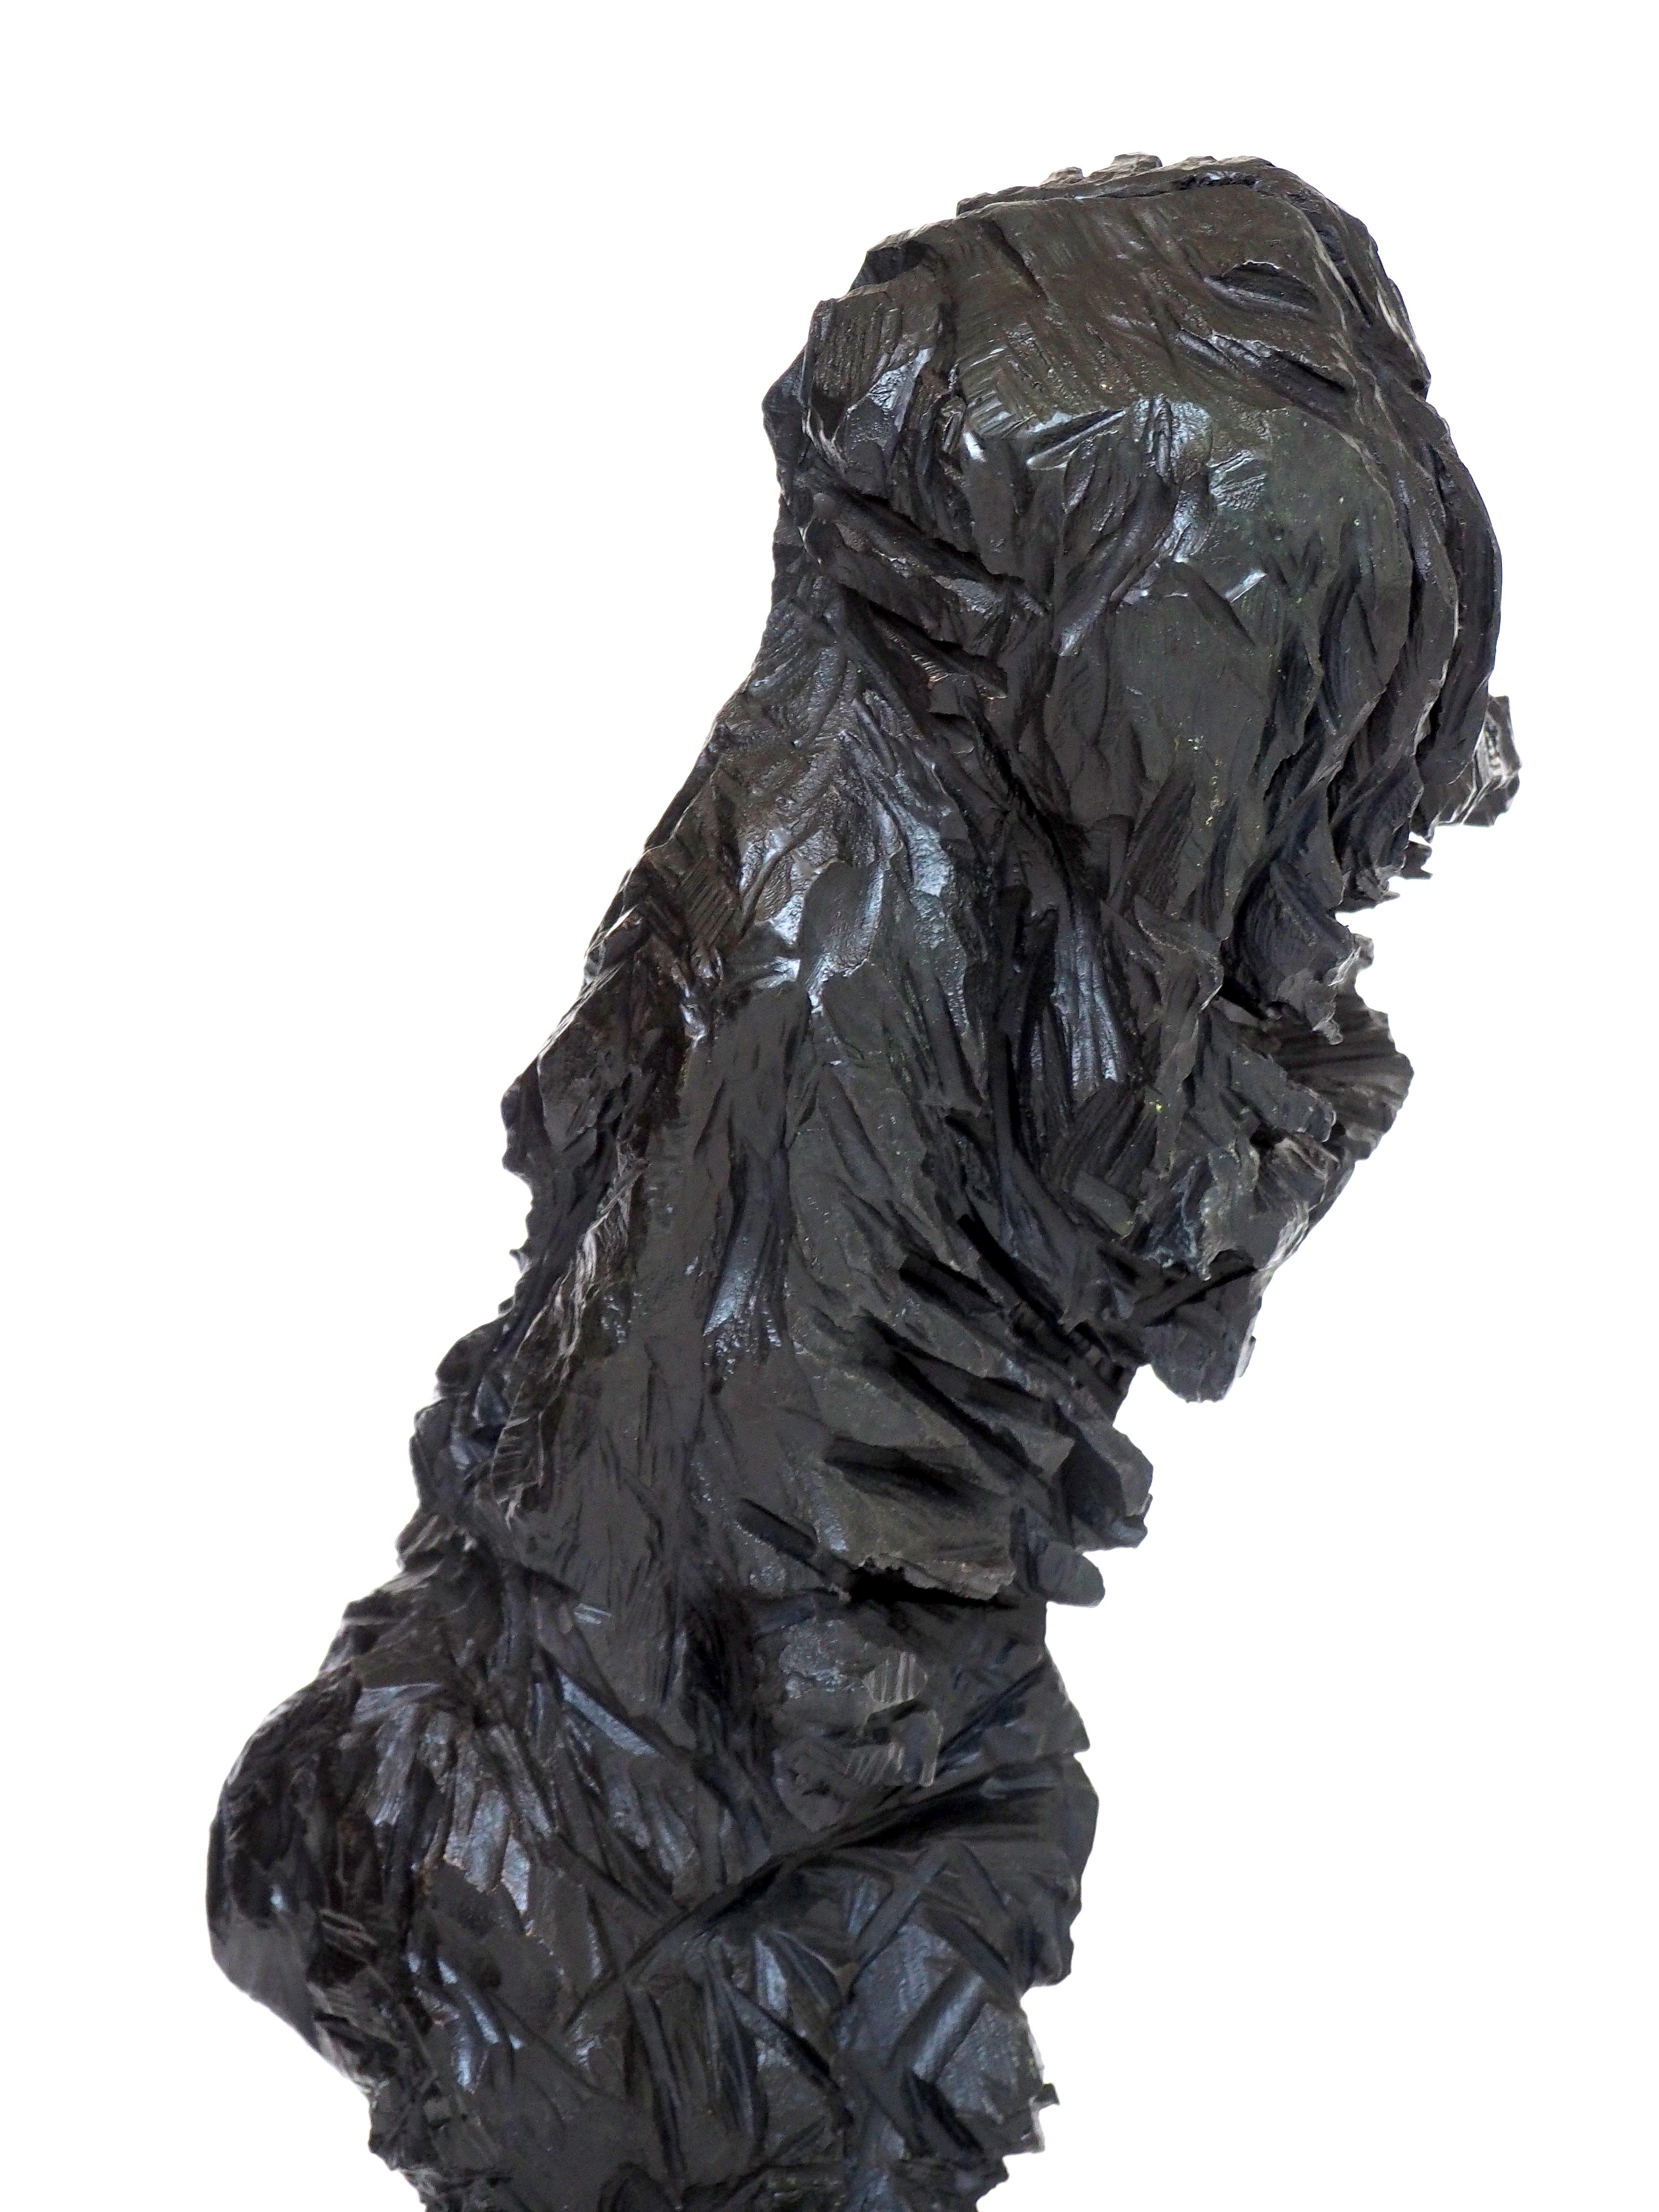 Organic Modern The Other, Contemporary Original Bronze Sculpture by Artist Jonathan Roson For Sale